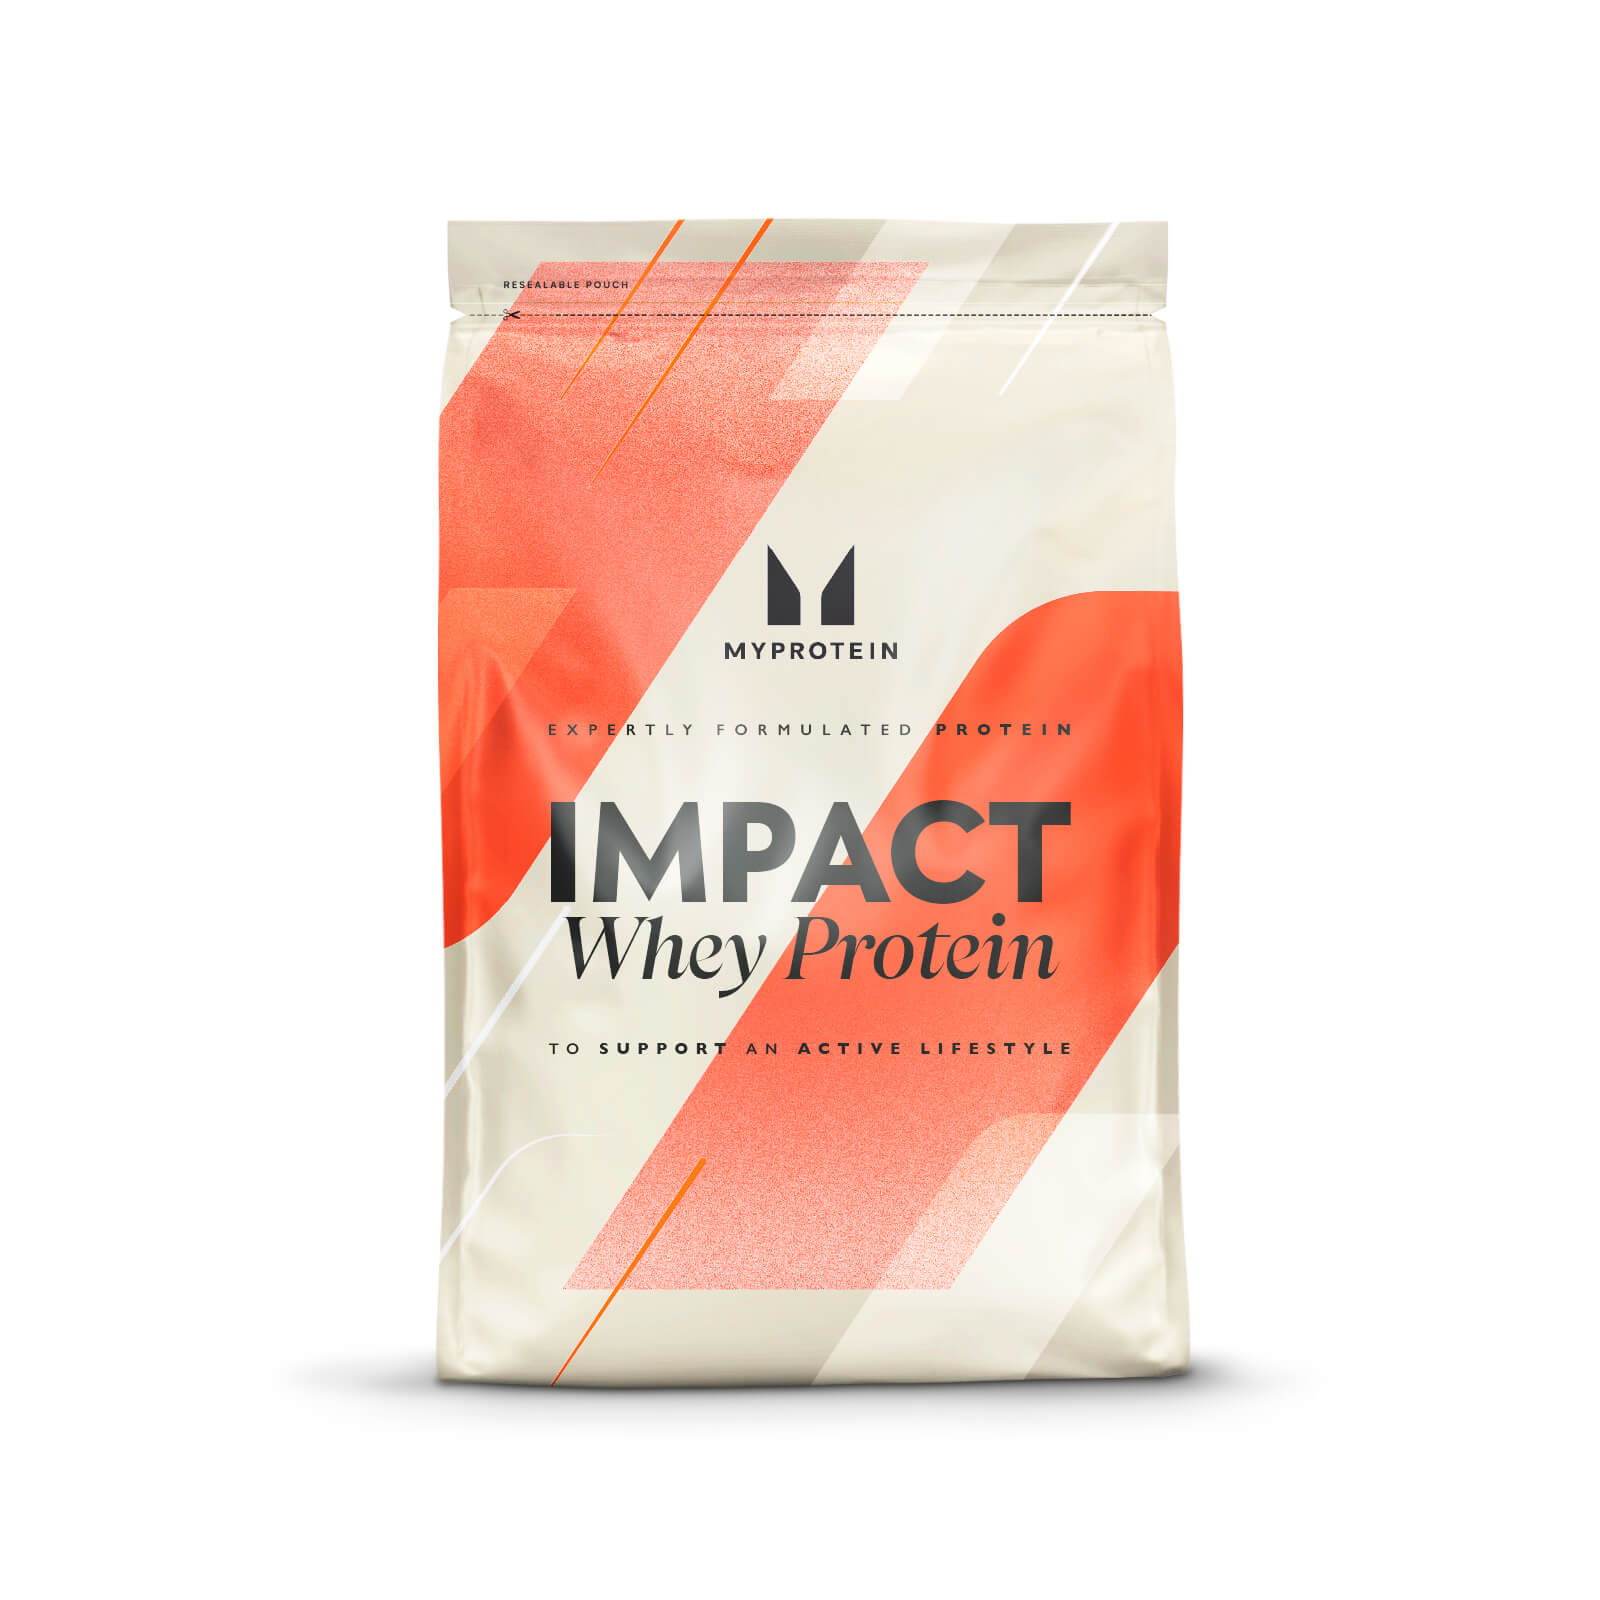 myprotein uk product